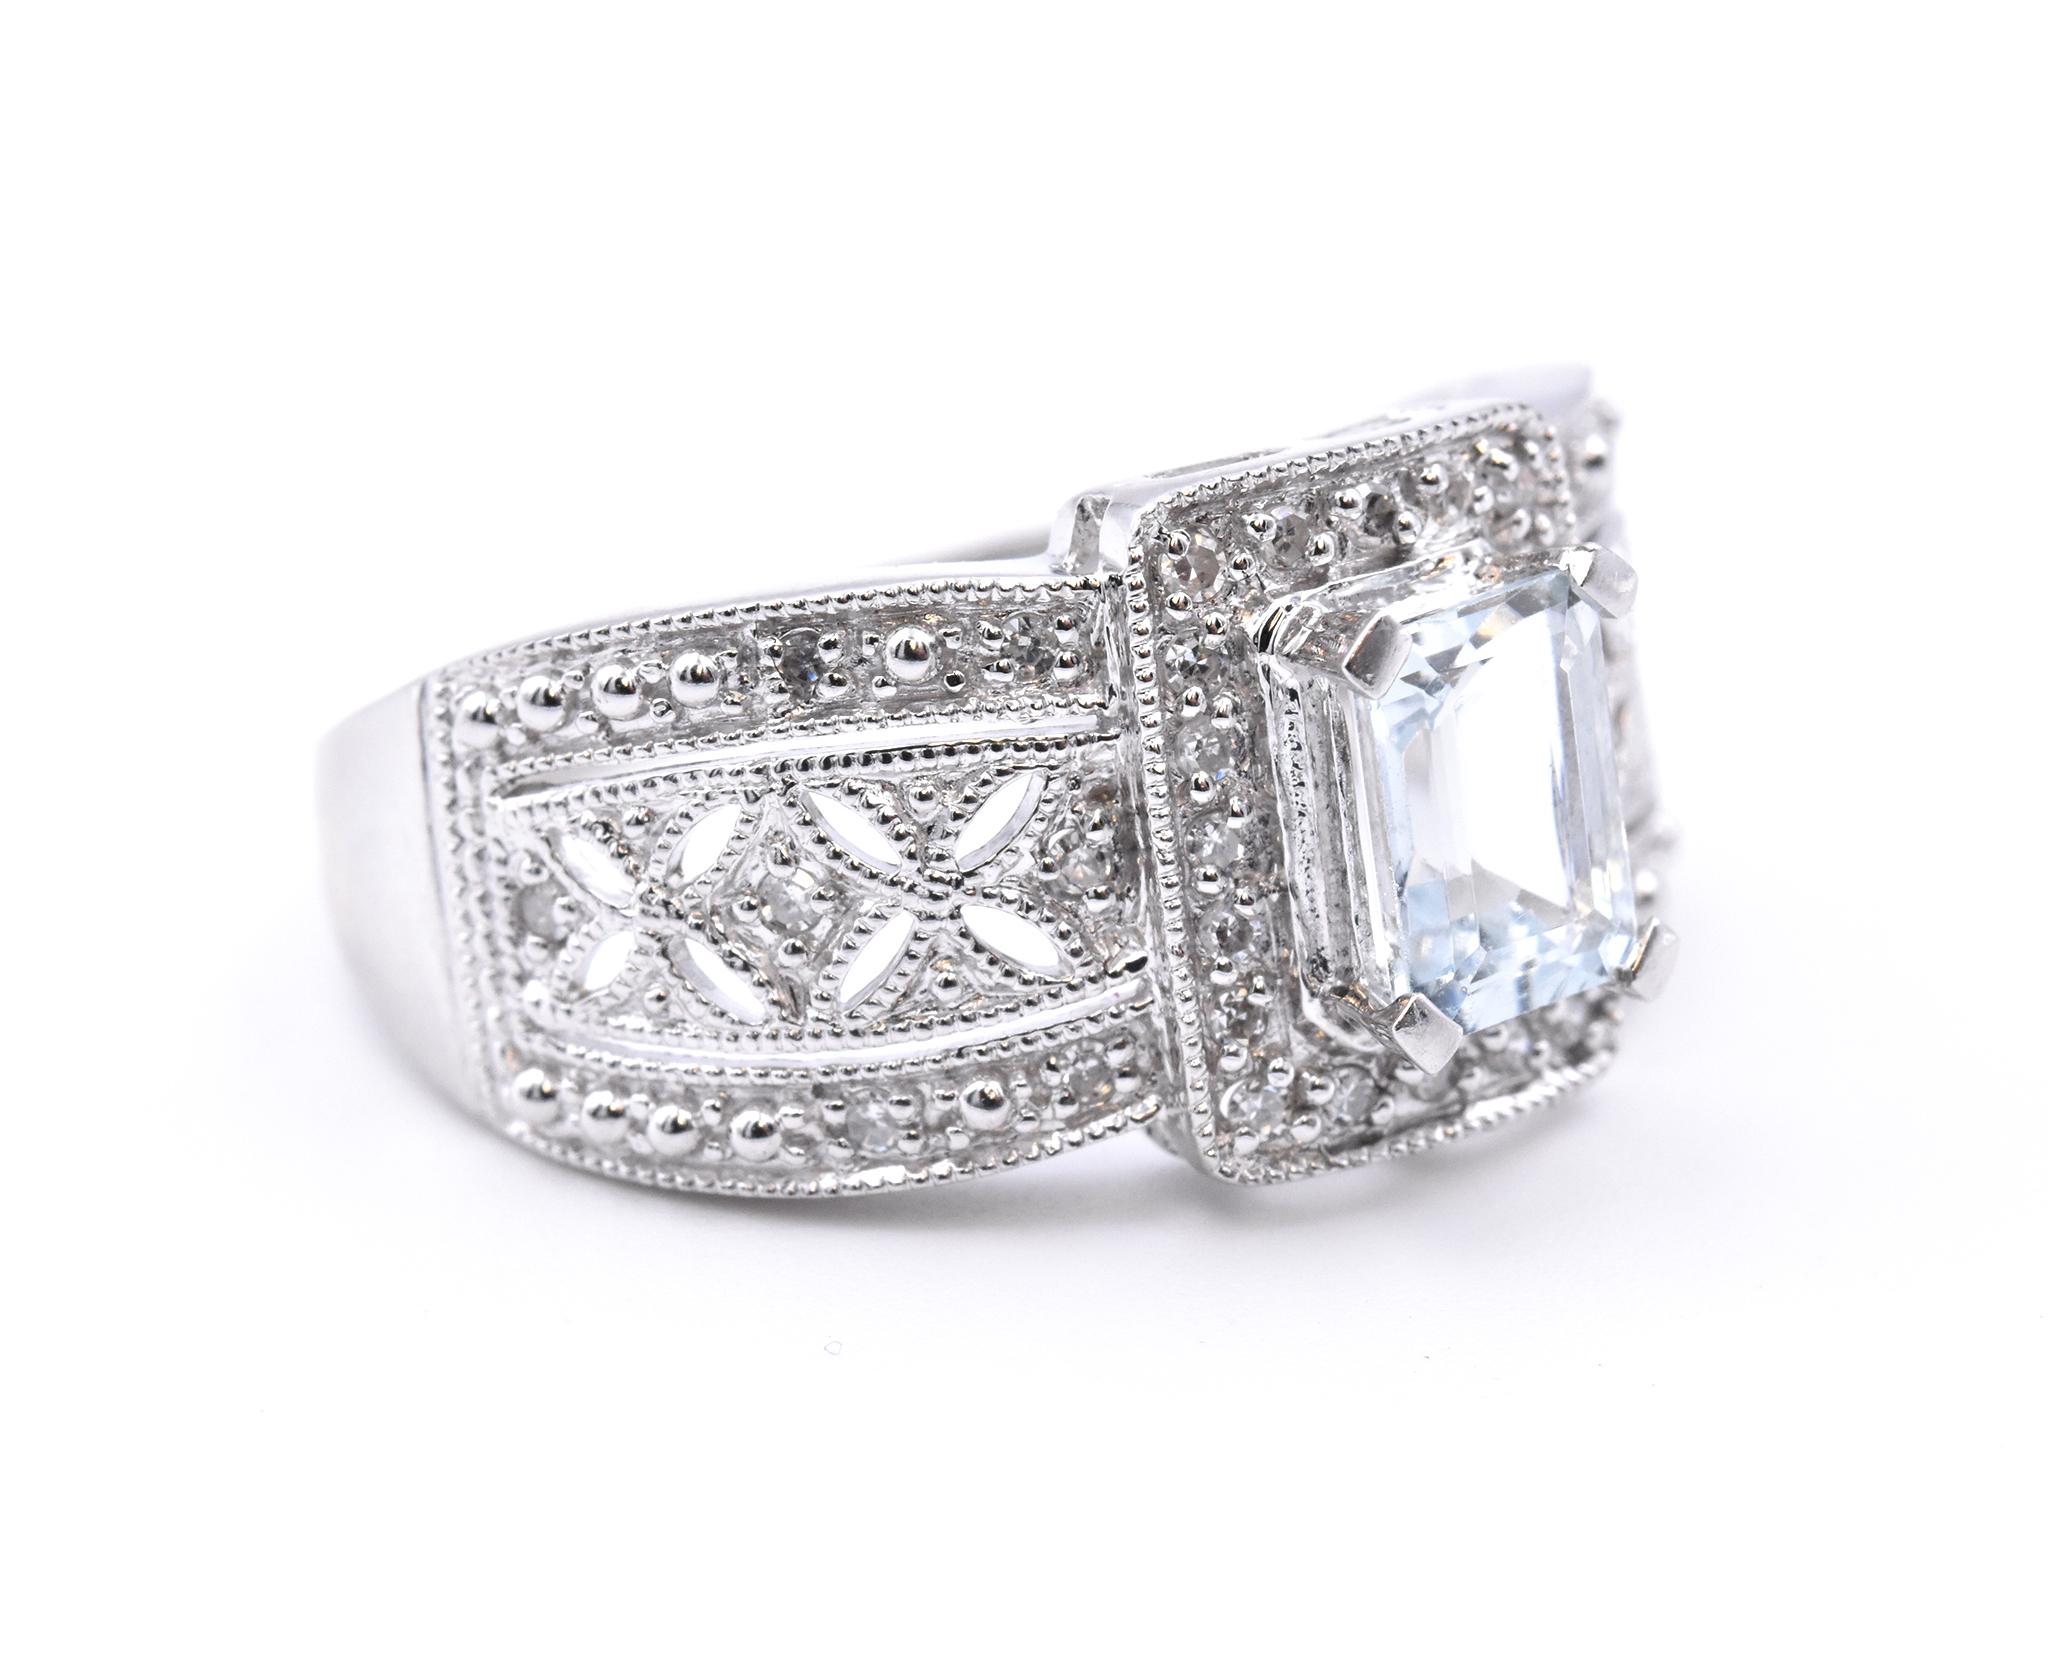 Designer: custom
Material: 14K white gold
Aquamarine: 1 emerald cut = .89ct
Diamond: 34 round cut = .17cttw
Color: H
Clarity: SI2
Ring Size: 10 (please allow up to  additional business days for sizing requests)
Dimensions: ring top measures 12.2mm